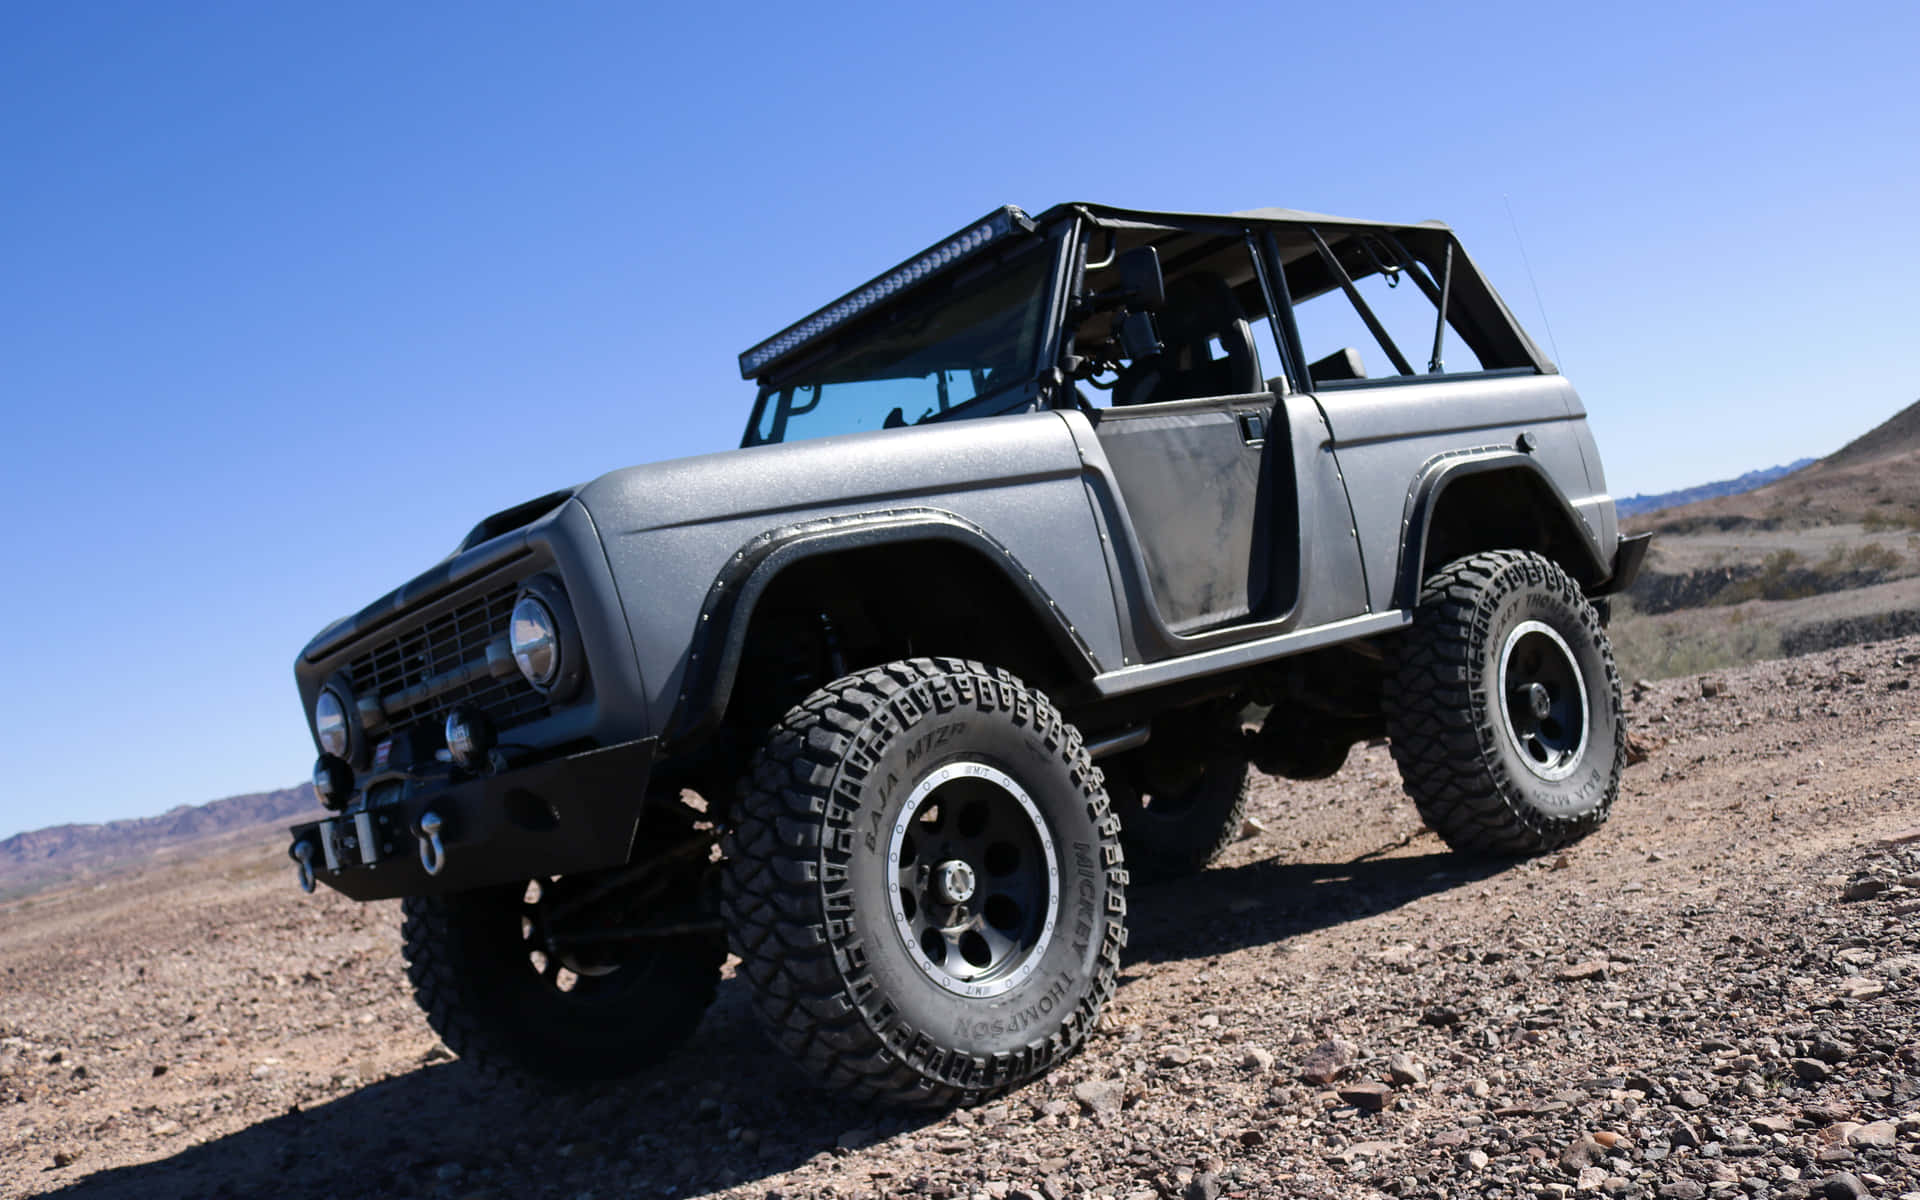 Get Ready to Conquer the Outdoors with the Ford Bronco